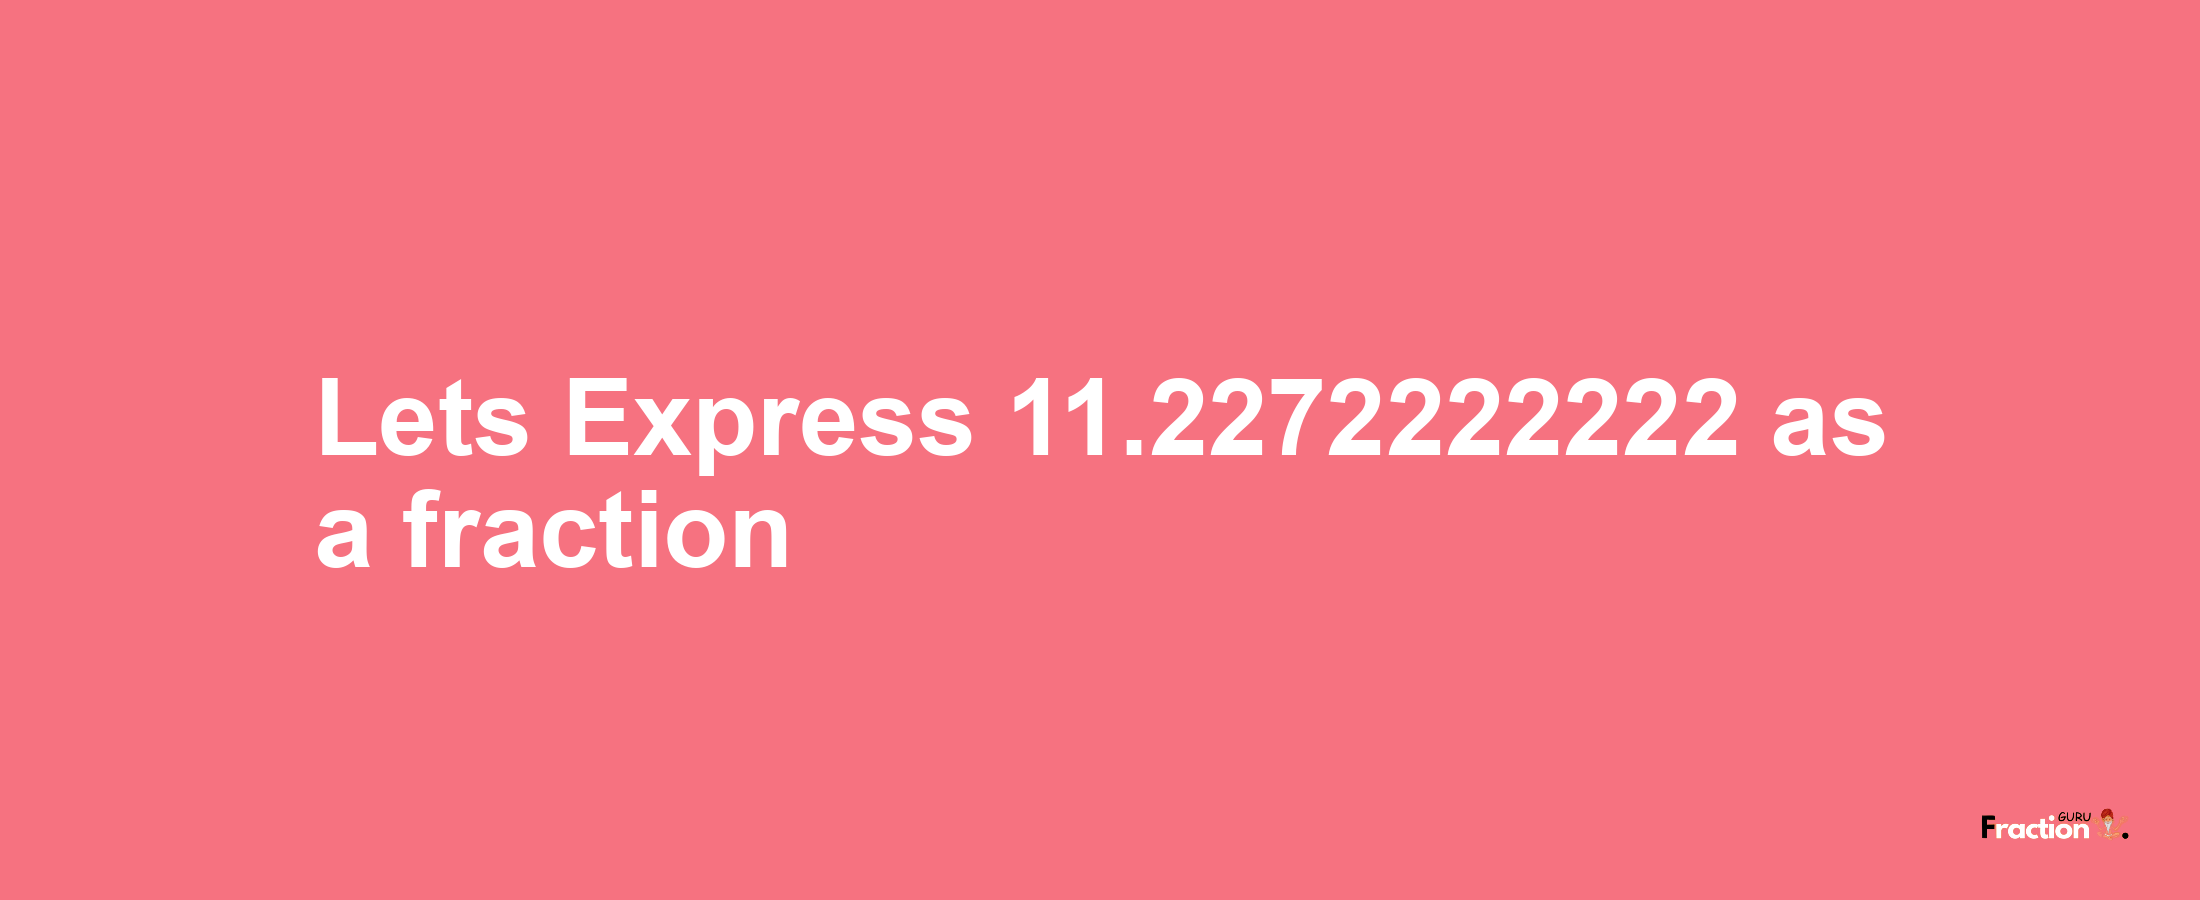 Lets Express 11.2272222222 as afraction